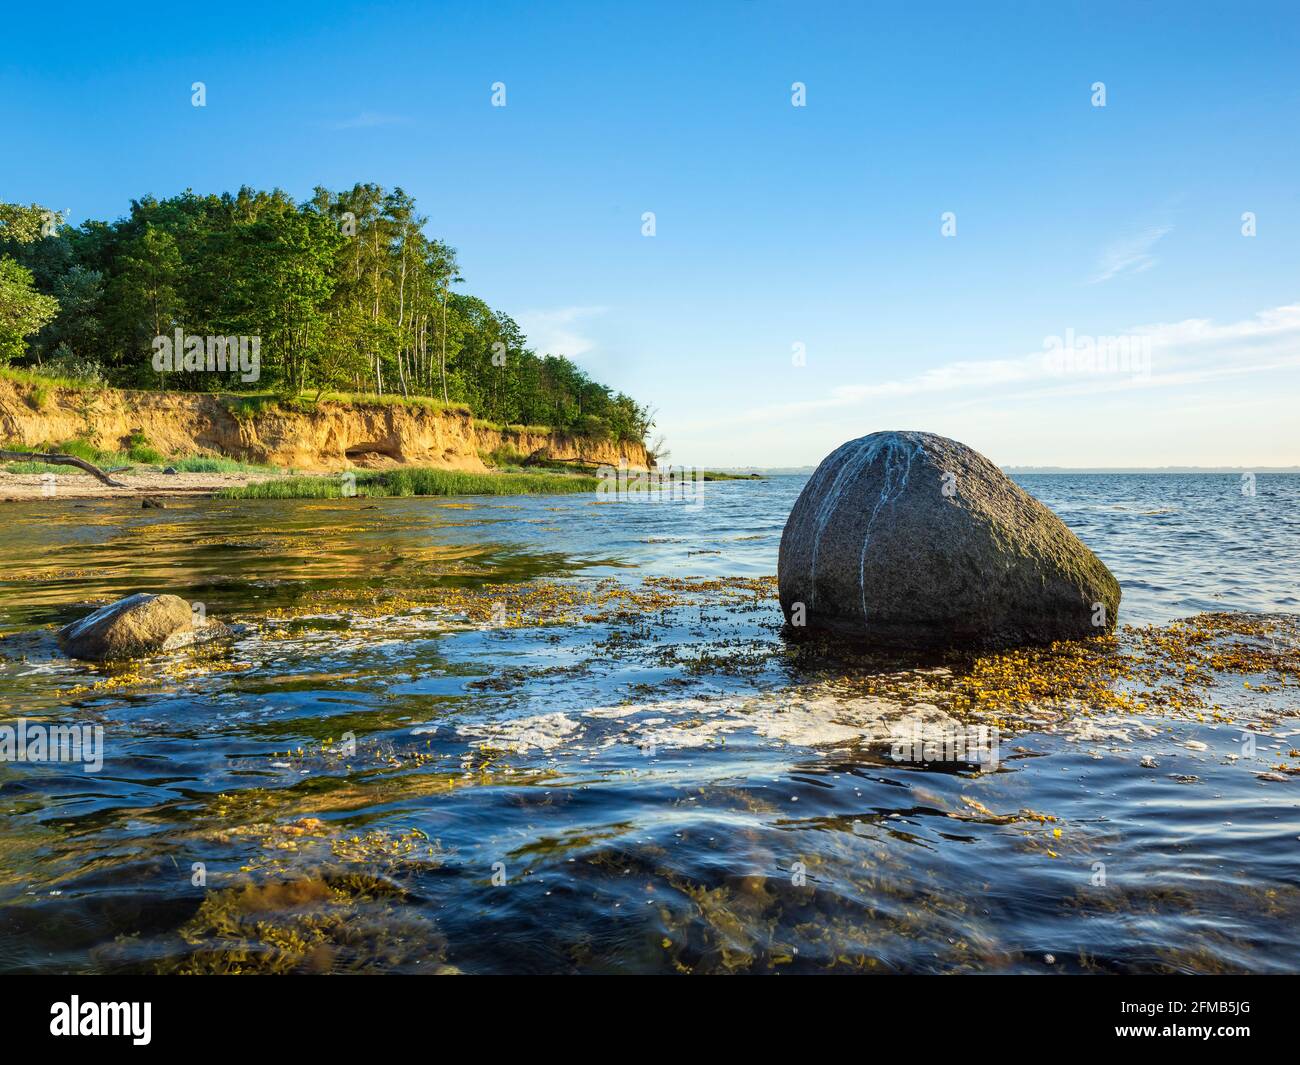 Natural coastal landscape on the Baltic Sea, steep coast in the evening light, large boulder in the Baltic Sea, Hohen Wieschendorf Huk, near Wismar, Mecklenburg-Western Pomerania, Germany Stock Photo